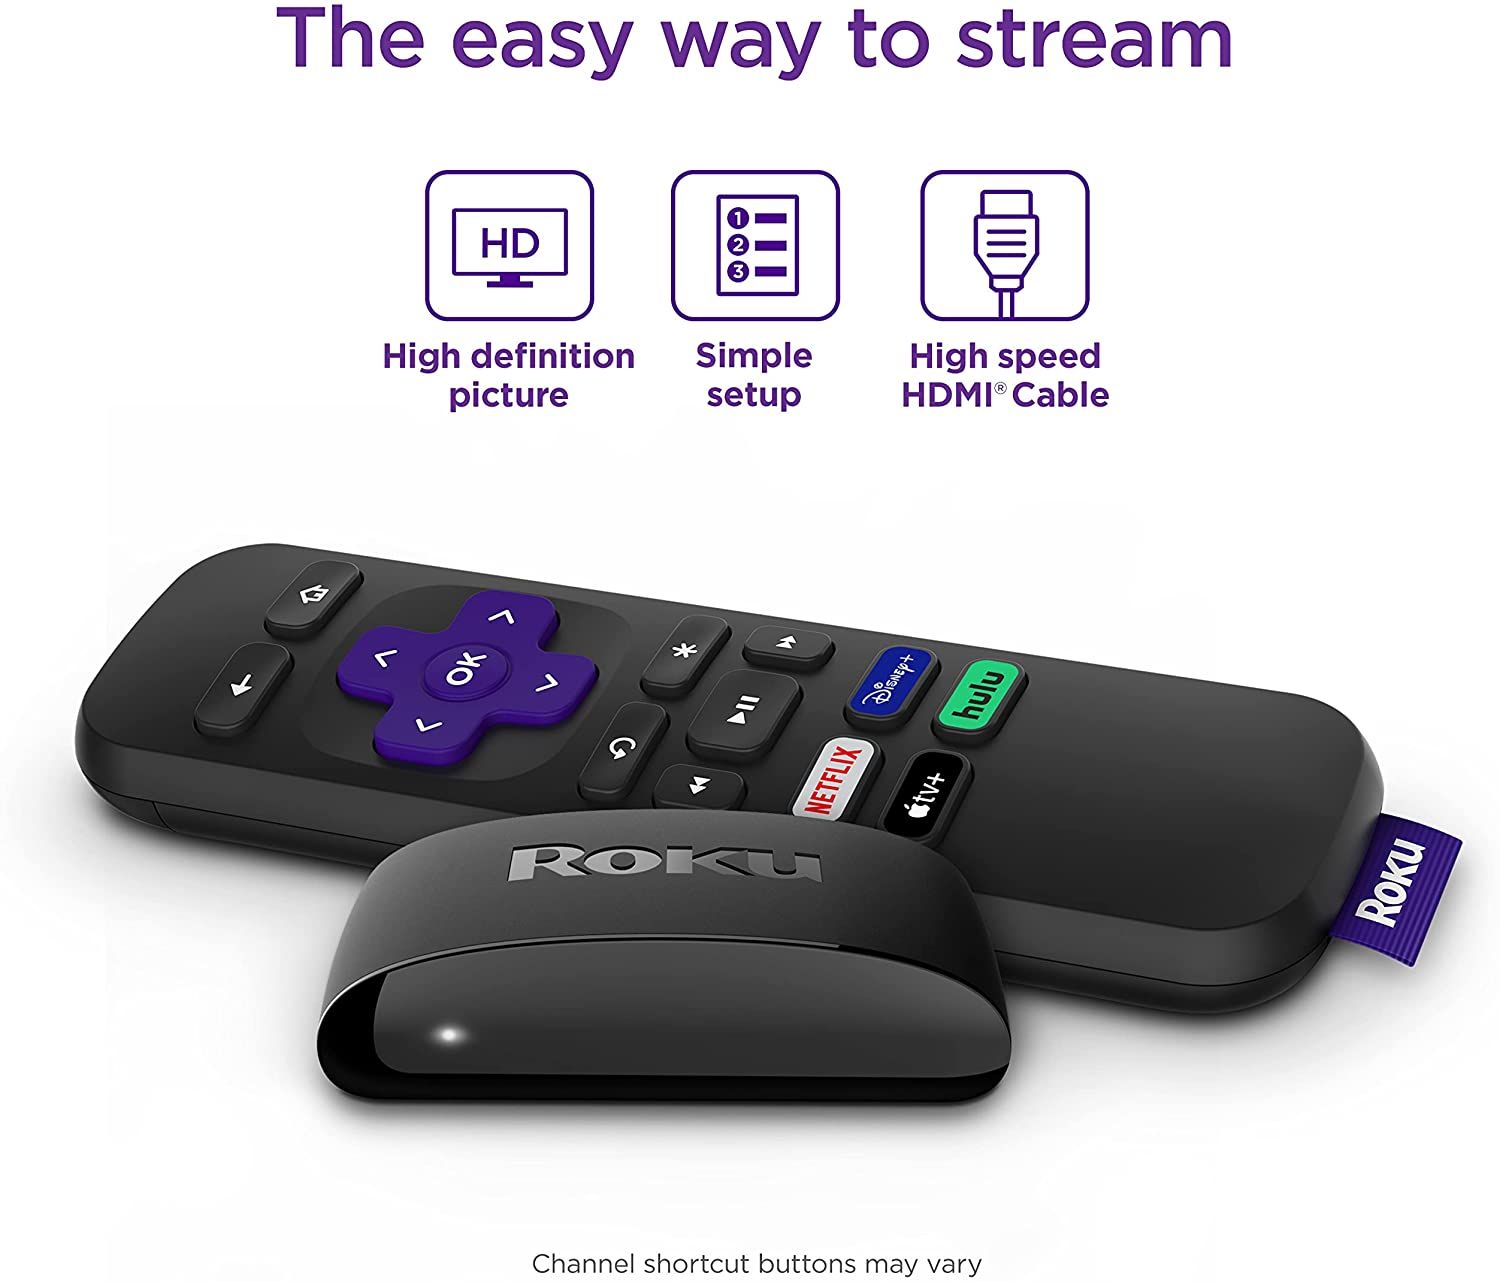 Roku Express along with its remote